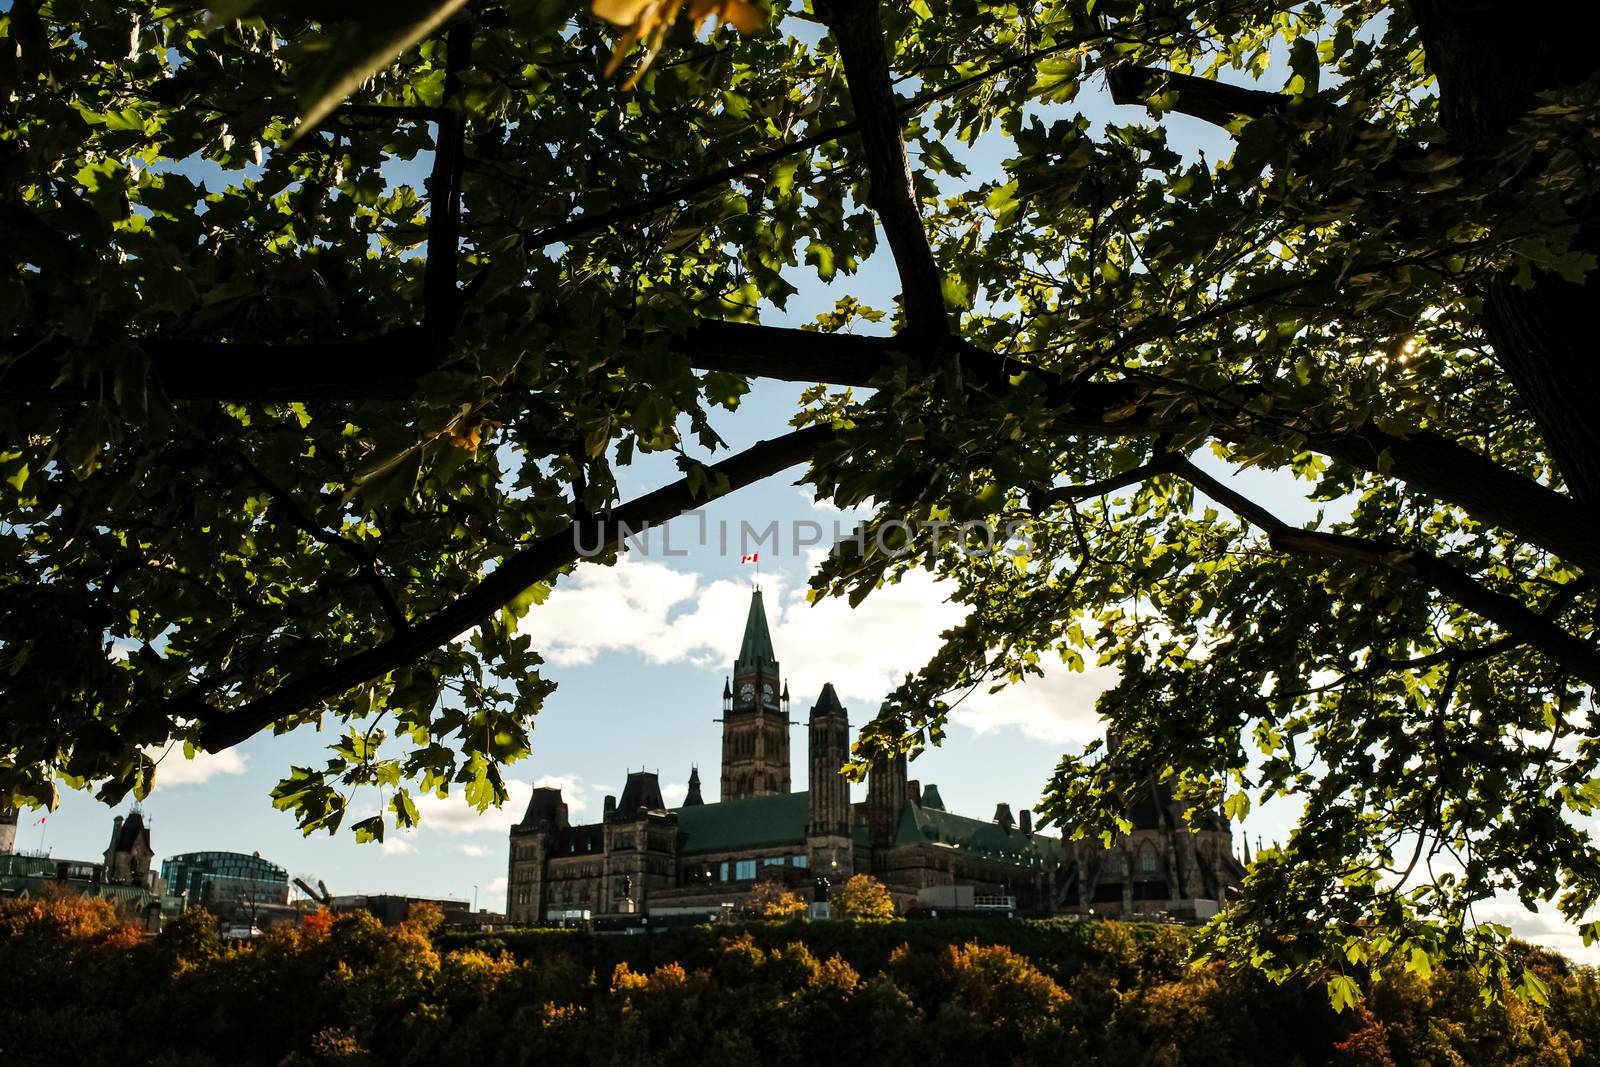 Parliament Hill in Ottawa, Ontario, Canada is seen through trees from a nearby park in the fall. The Peace Tower and Centre Block are framed by the leaves and autumn colors.